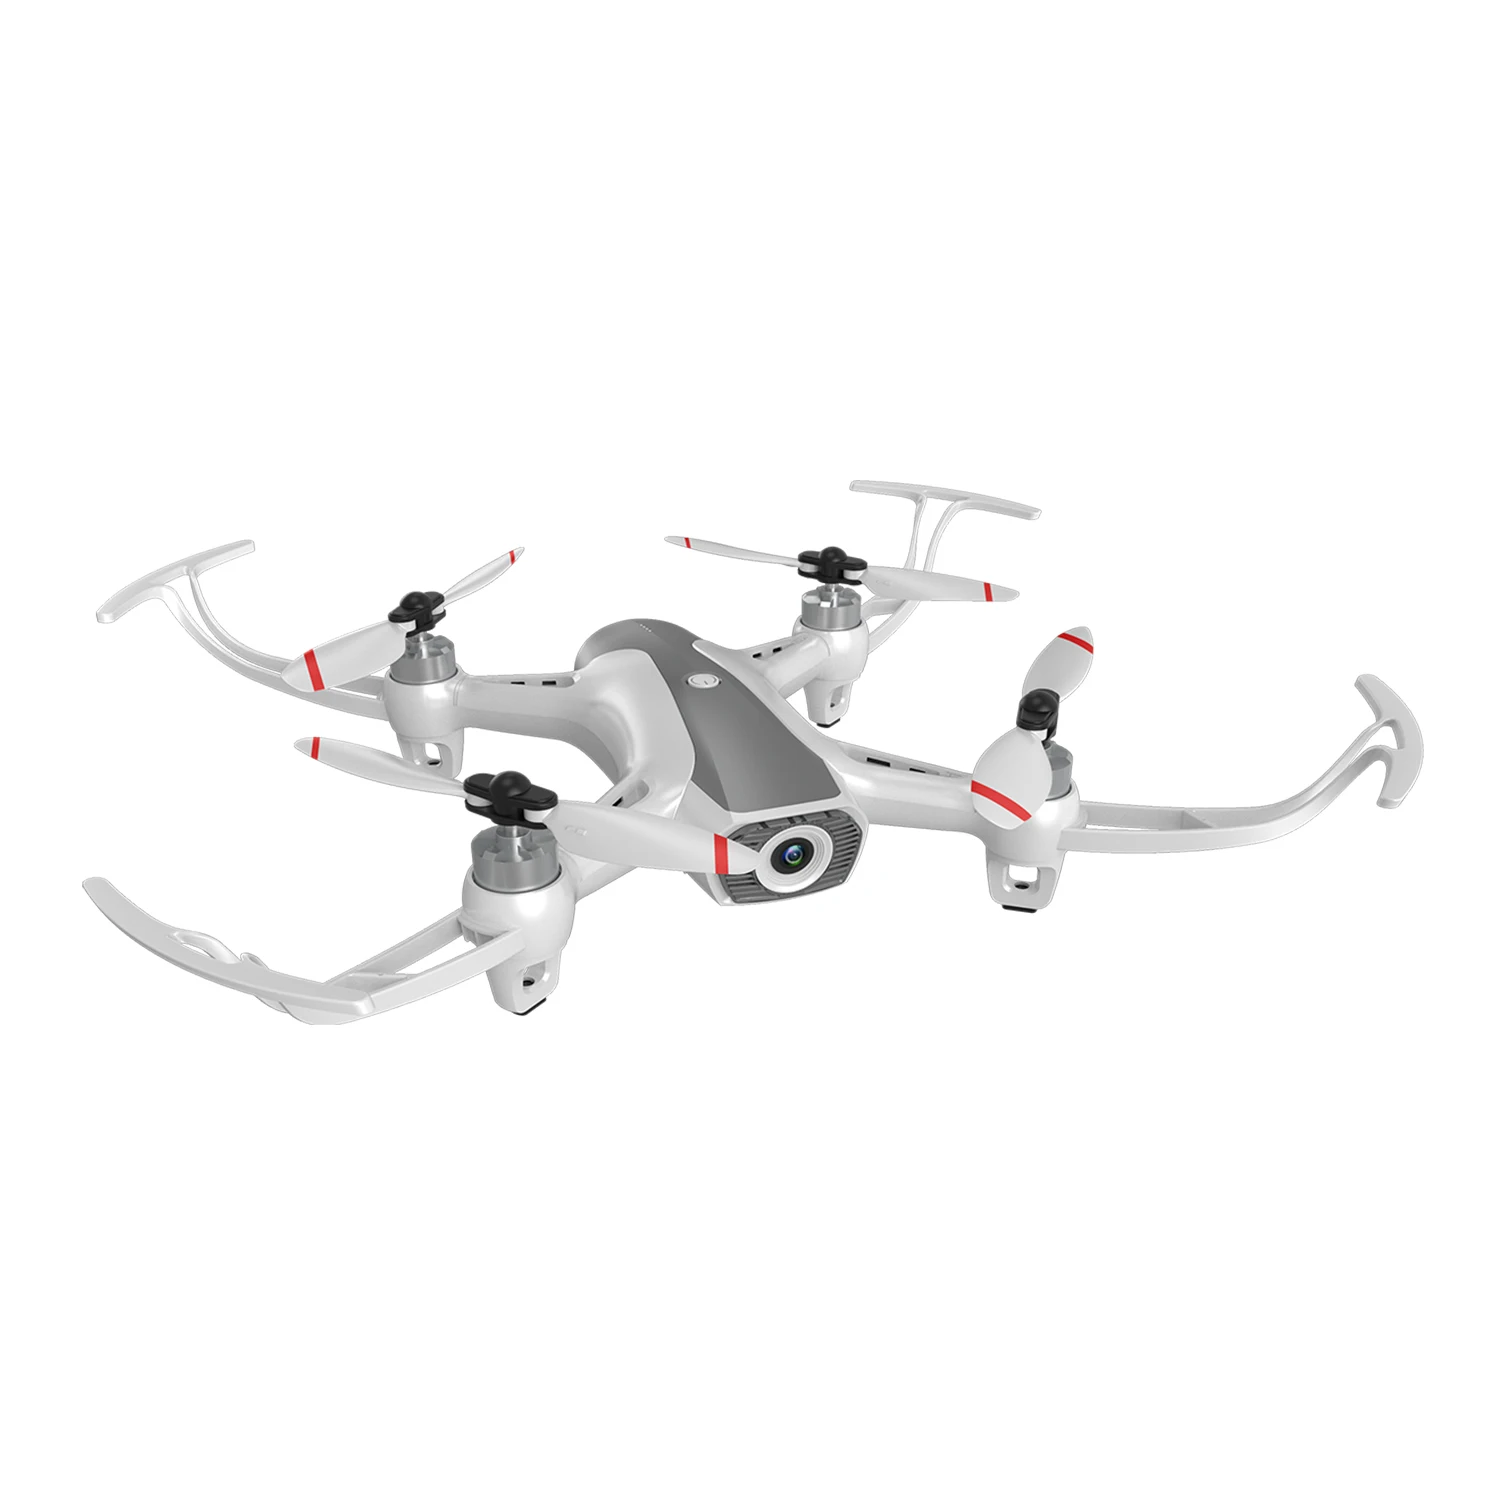 

New Arrival Syma W1 Pro W1PRO RC Drone with Camera 4K Camera 5G Wifi FPV 18 Mins GPS Drone Brushless 2.4G RC Quadrocopter Hot, White